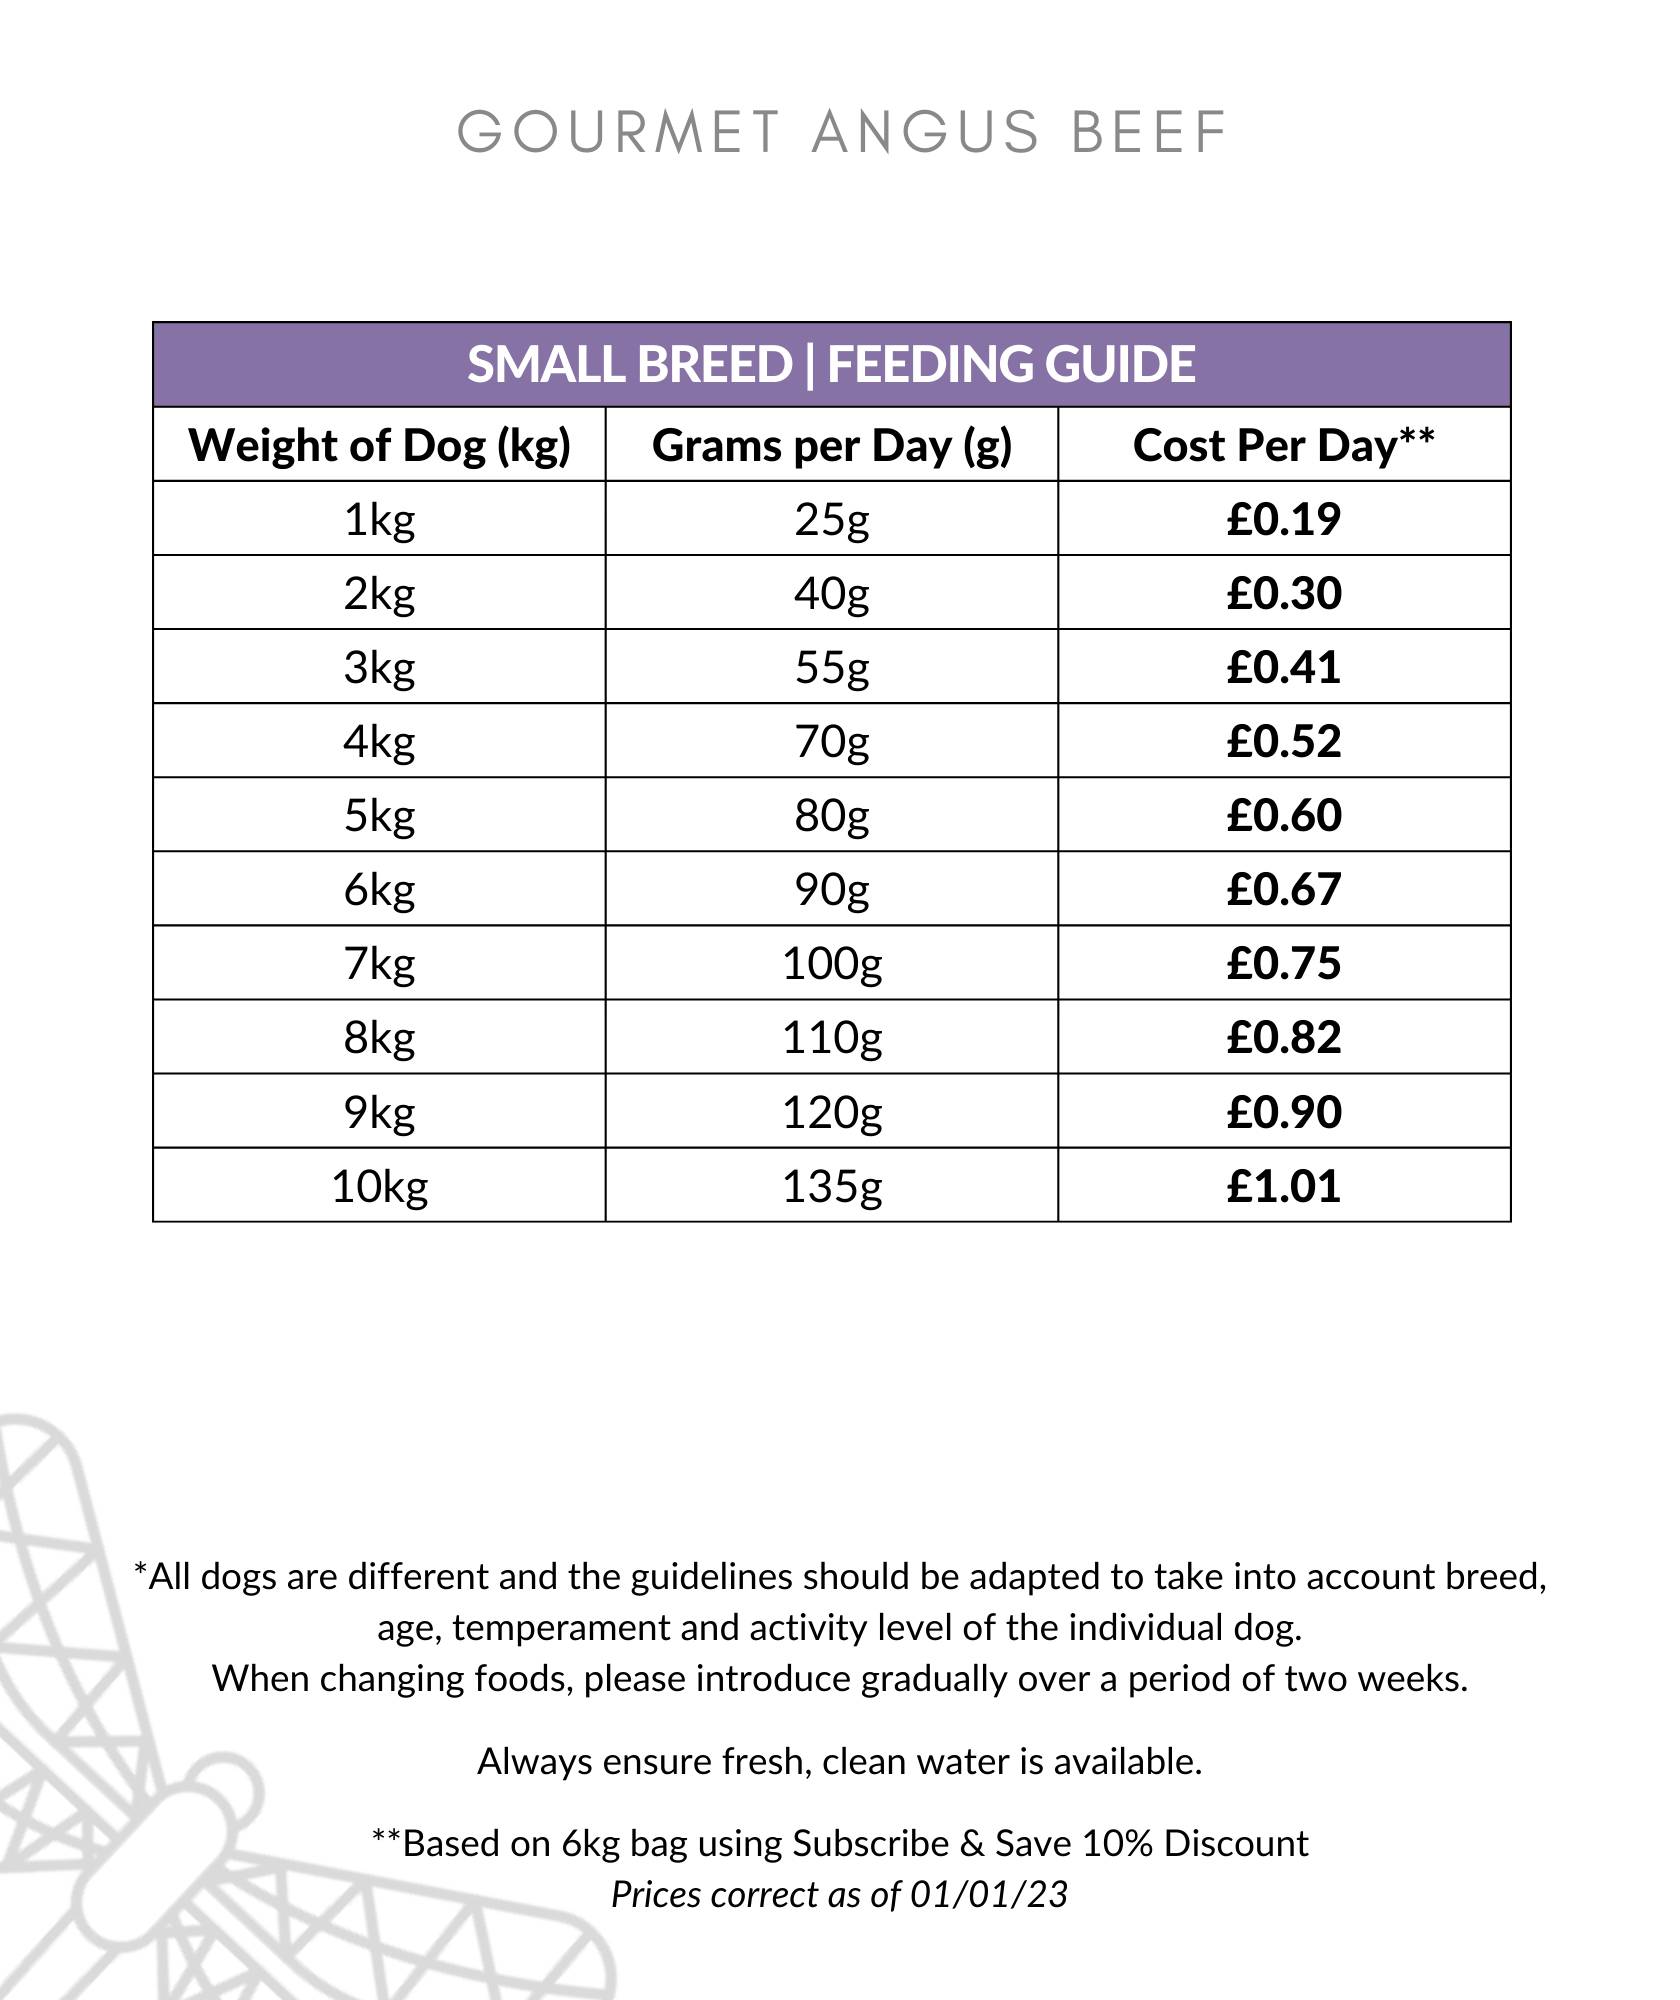 Gourmet Angus Beef Small Breed Dog Food Feeding Guide 1-10kg